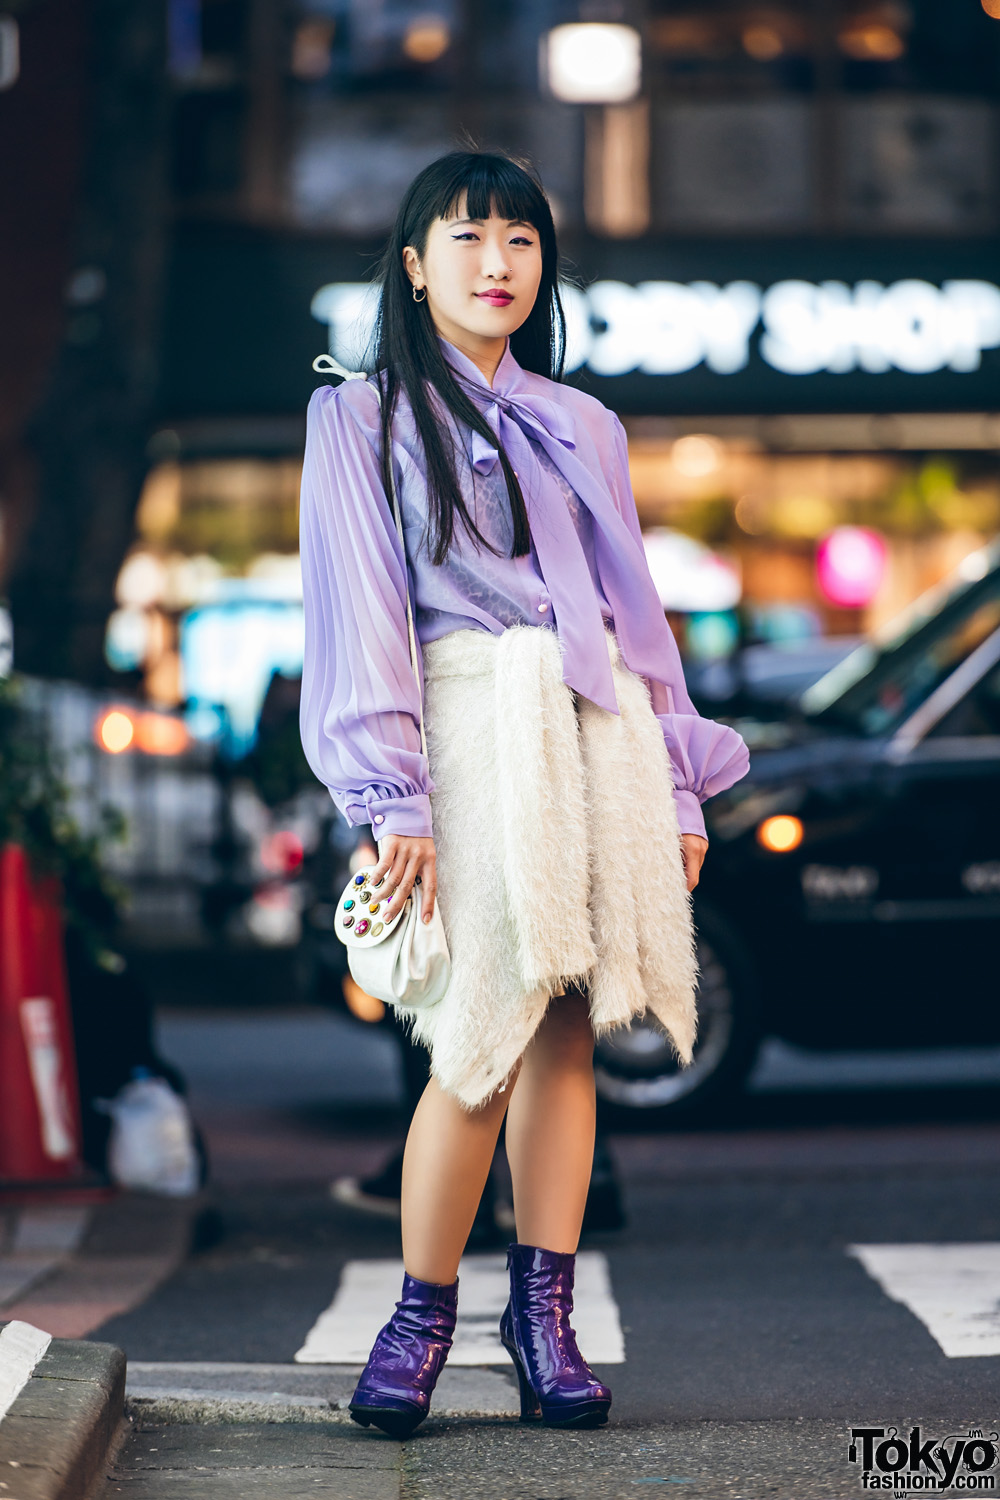 Chic Vintage Harajuku Street Style w/ Pussybow Blouse, Furry Cardigan as Skirt, Patent Purple Boots & Buttons Sling Bag